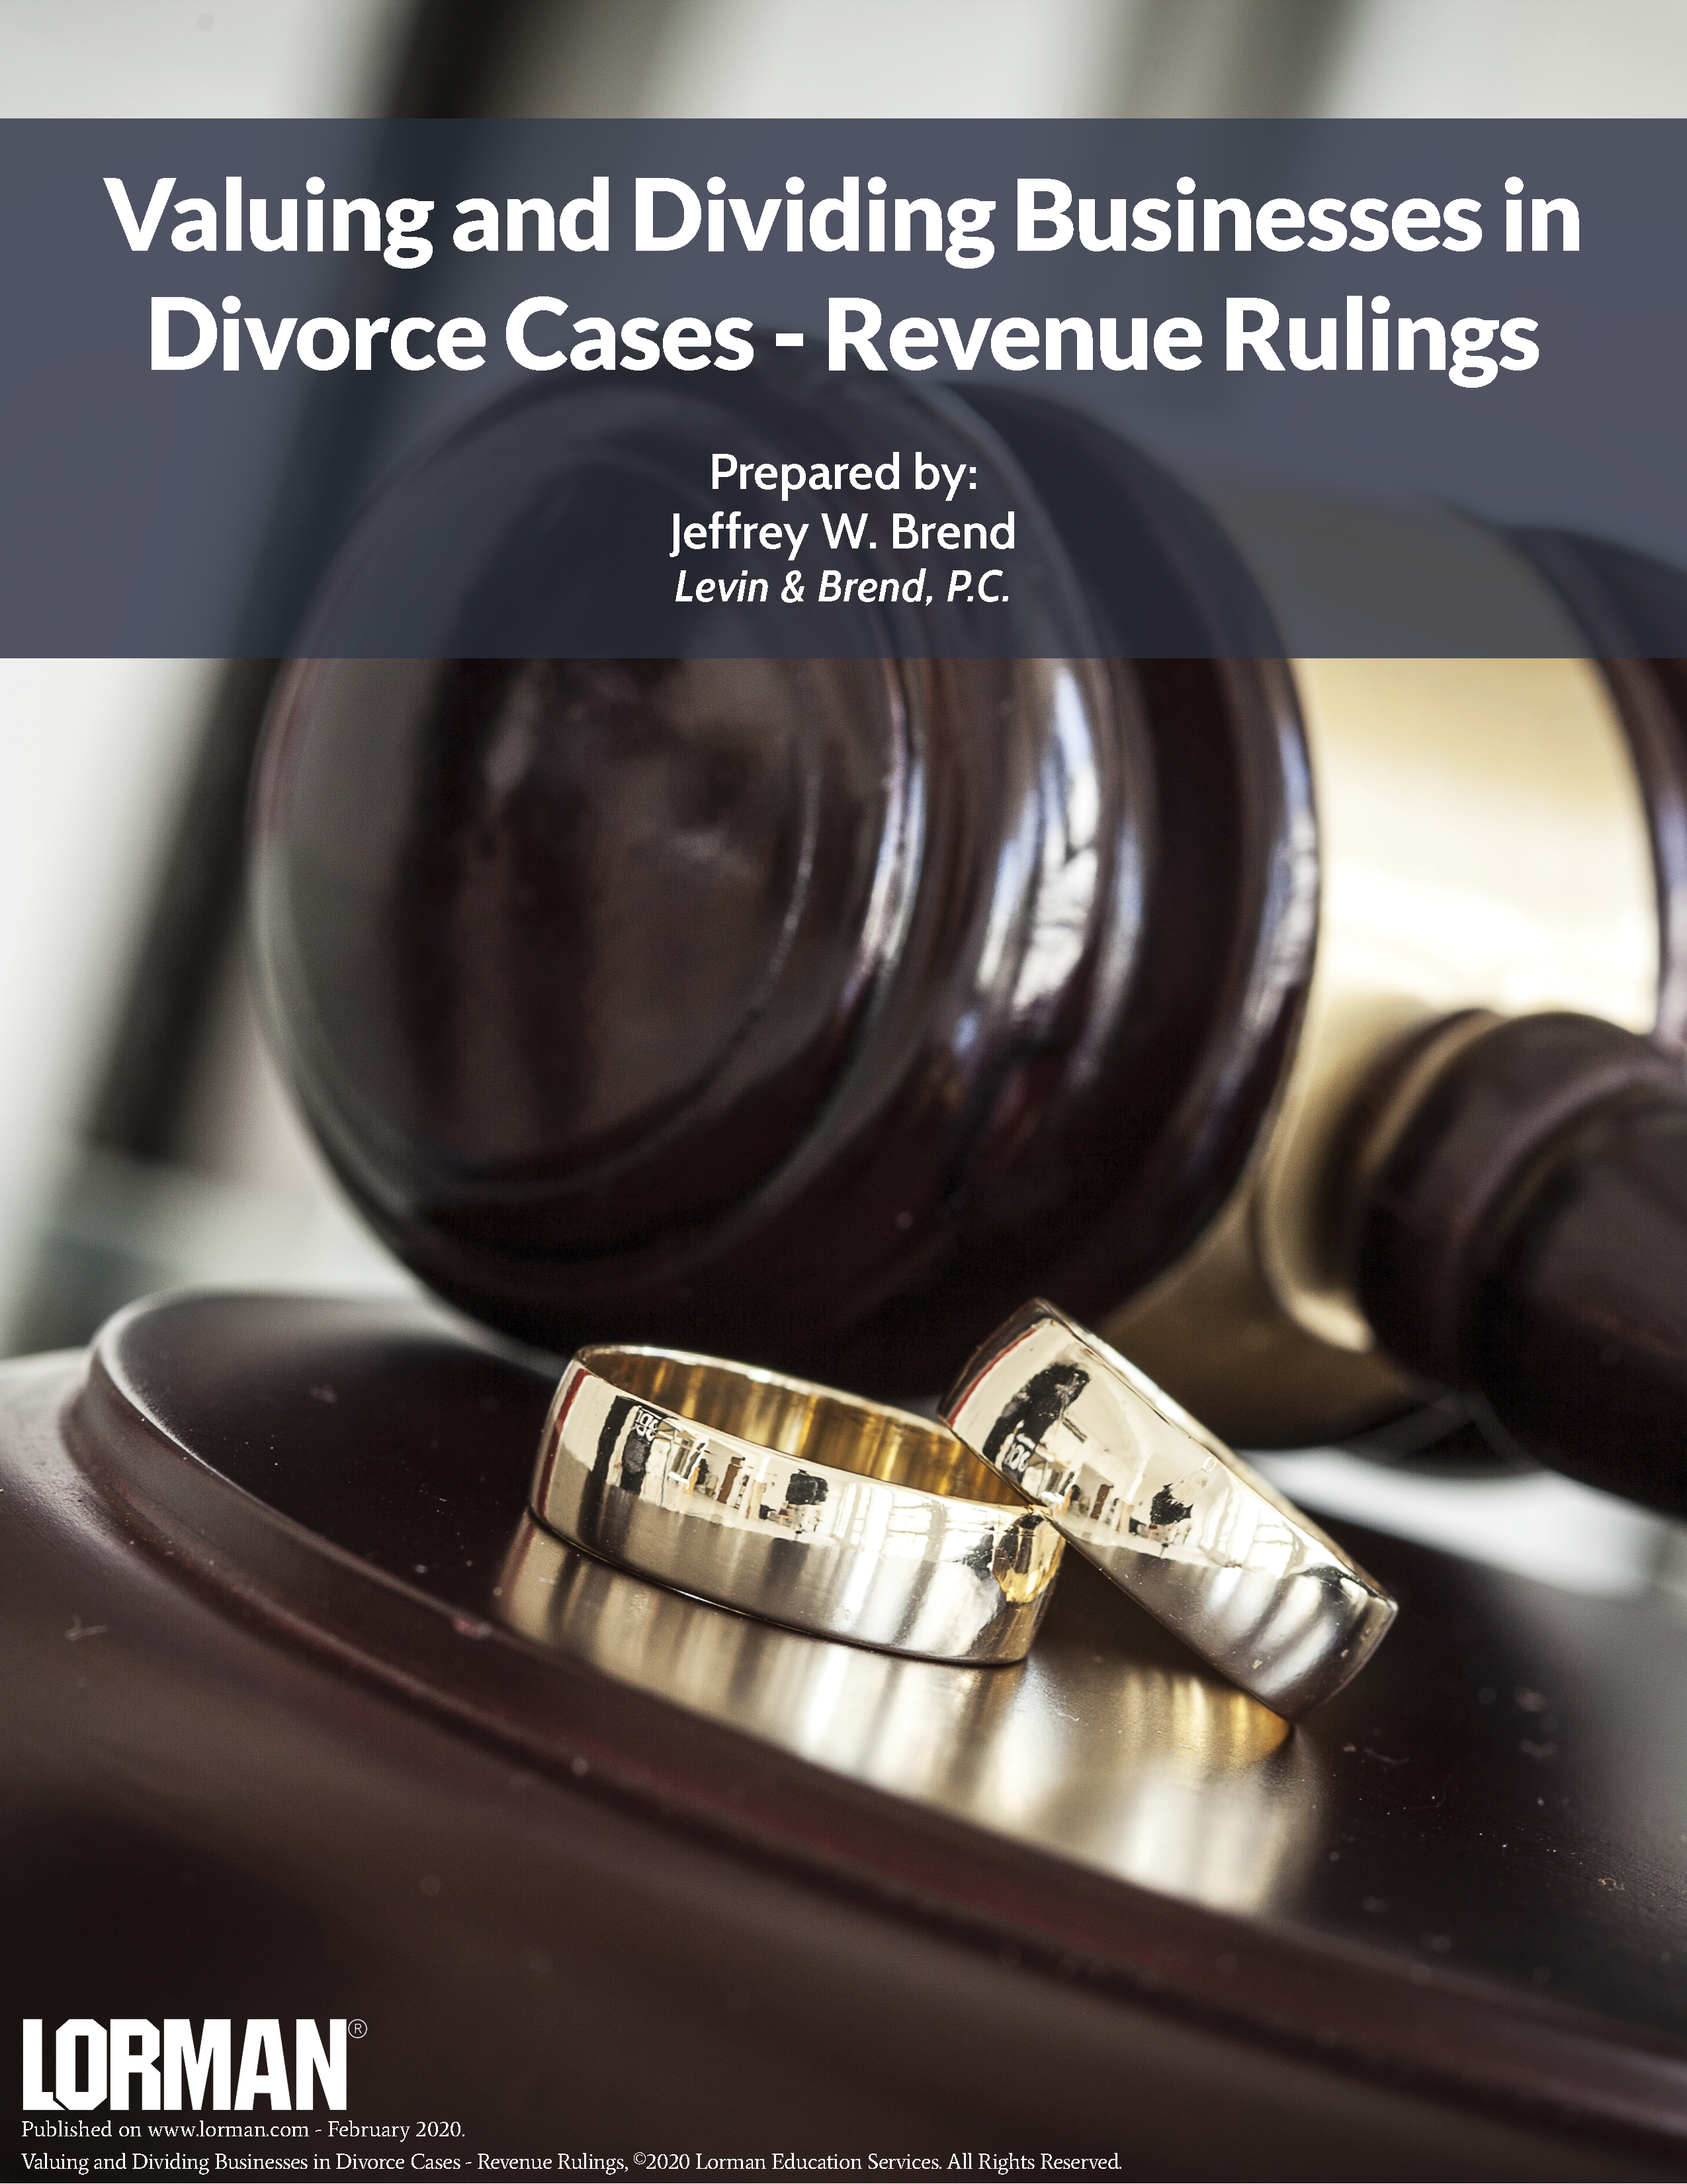 Valuing and Dividing Businesses in Divorce Cases - Revenue Rulings